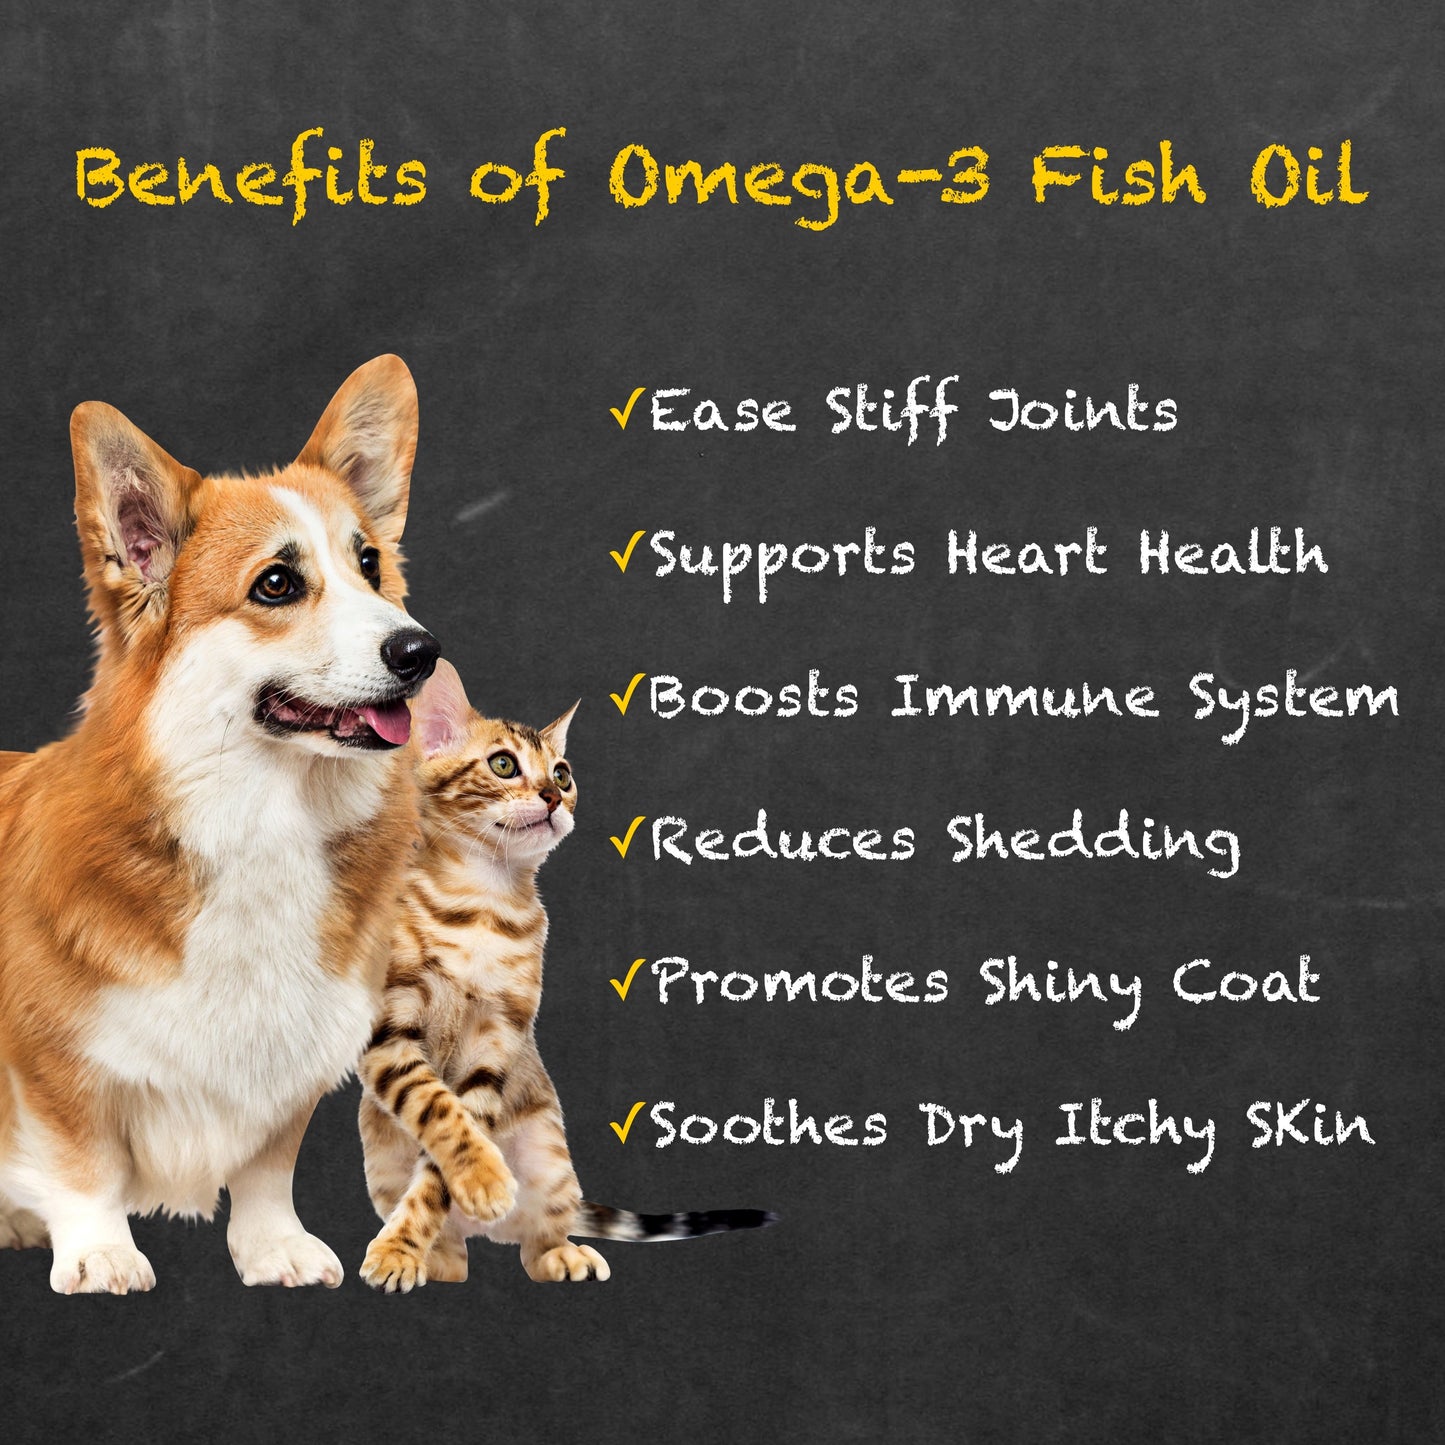 Deluxe Naturals Omega-3 Fish Oil for Dogs and Cats - 16 fl. oz.